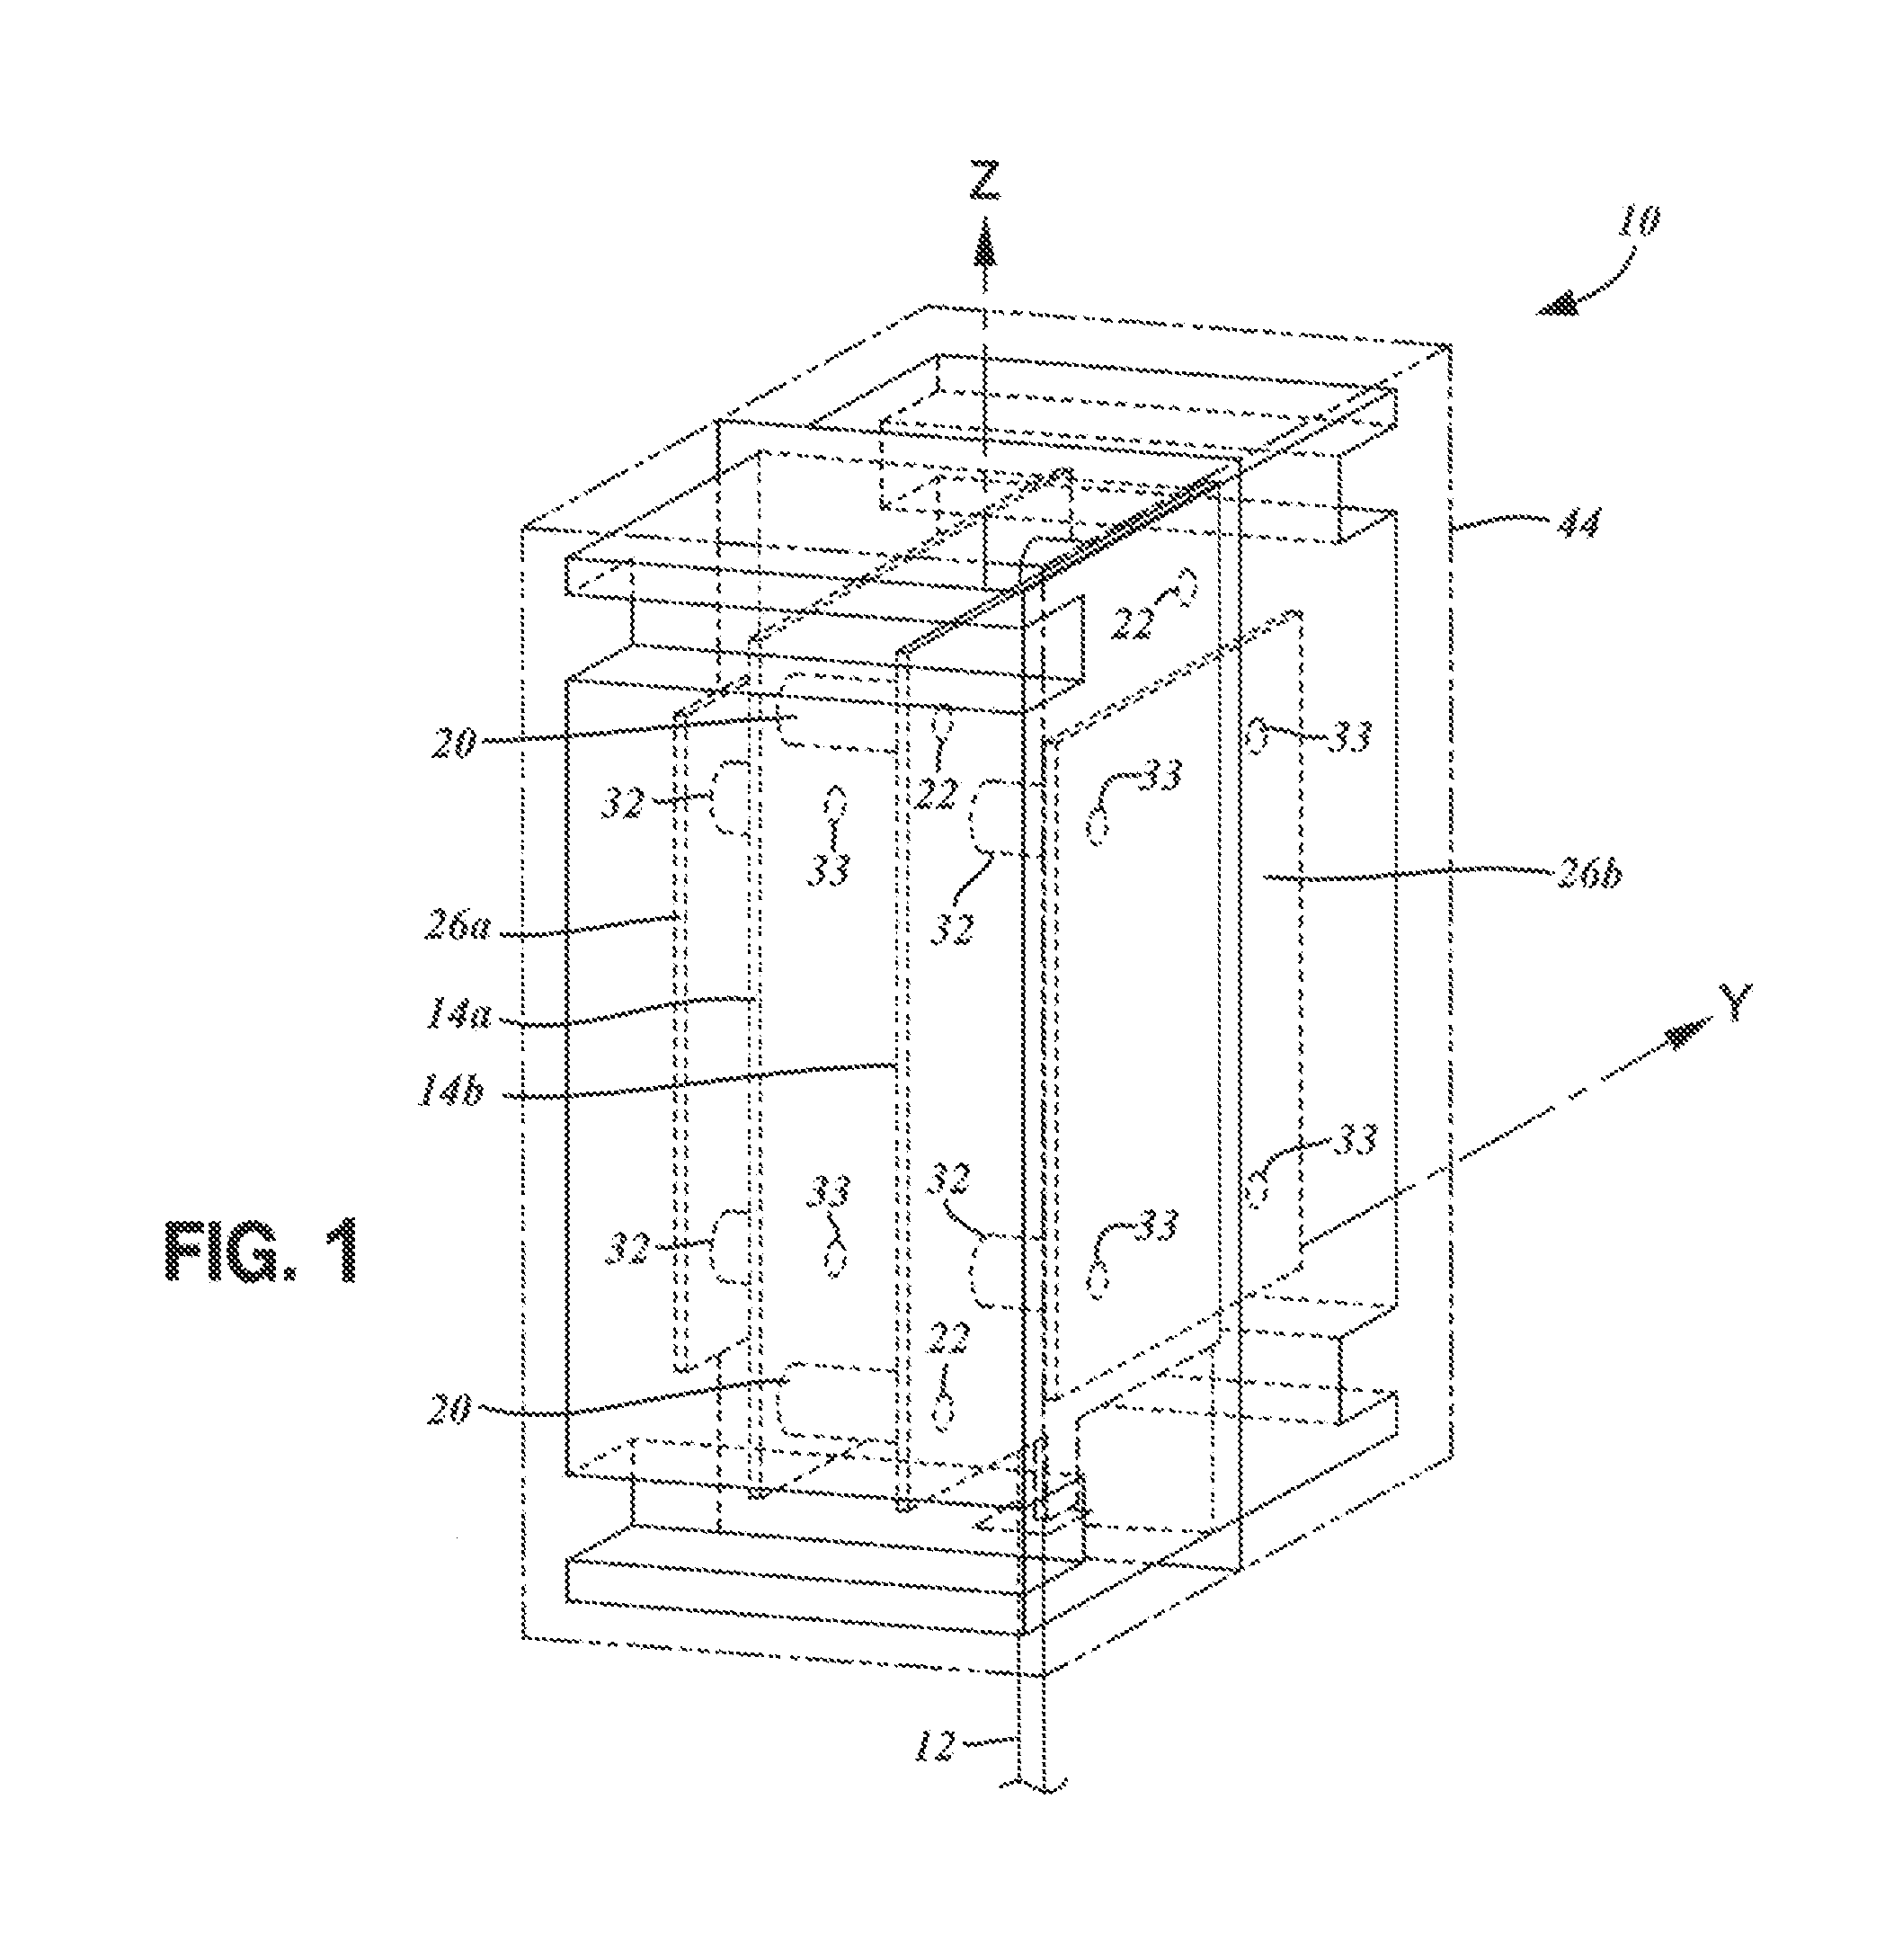 Radio frequency patch antennas for wireless communications